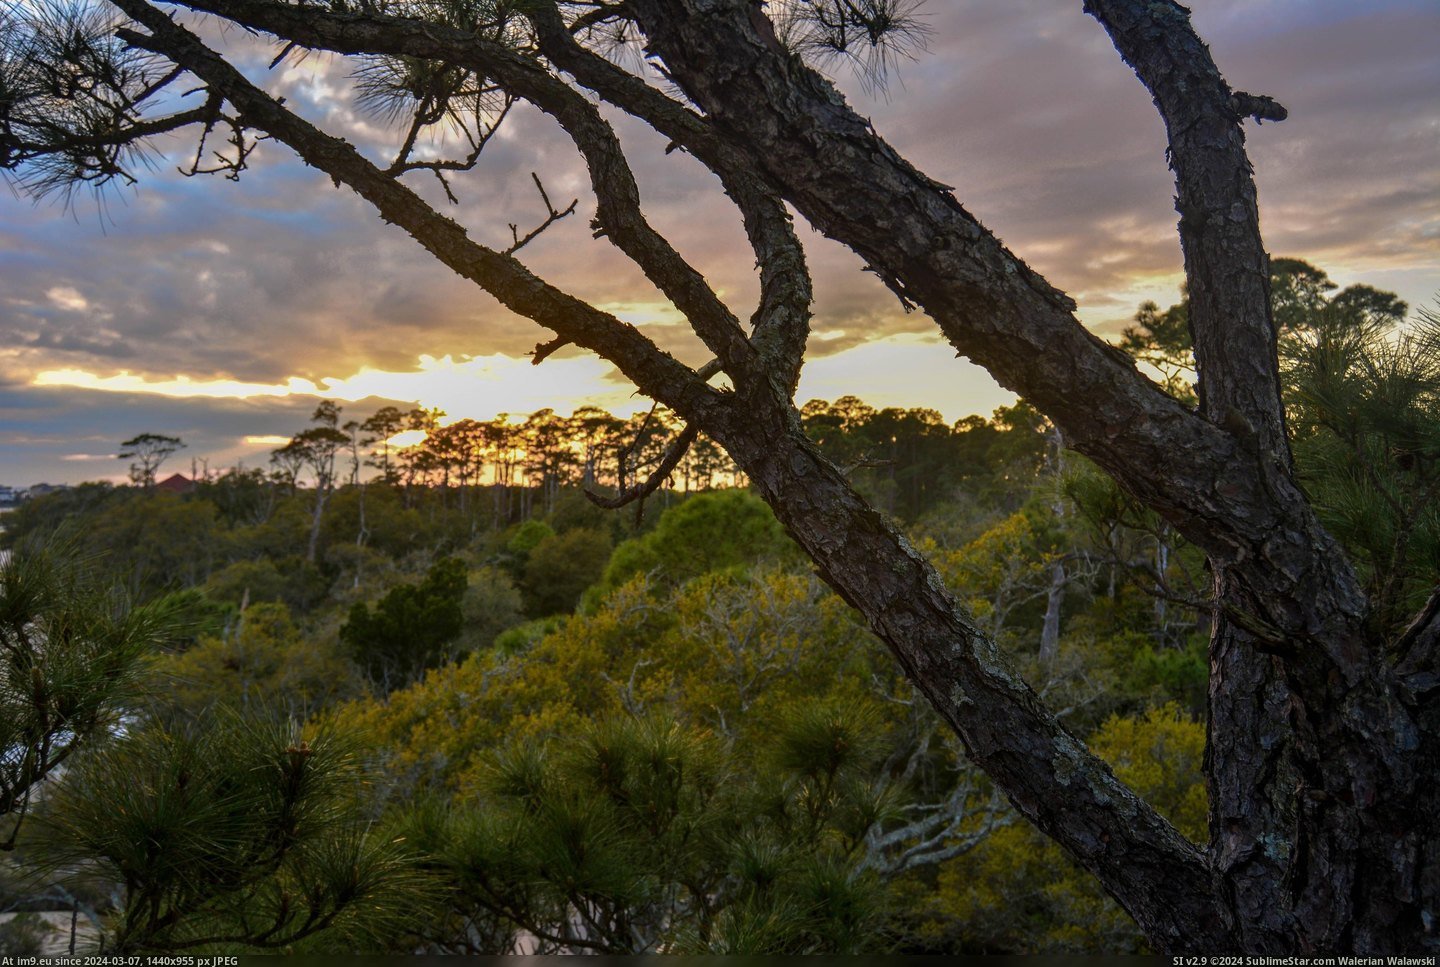 #Feet #Sunset #6000x4000 #Overlooking #Pensacola #Trees #Florida [Earthporn] Around 30 feet up in the trees, overlooking the sunset in Pensacola, Florida. [6000x4000] Pic. (Image of album My r/EARTHPORN favs))